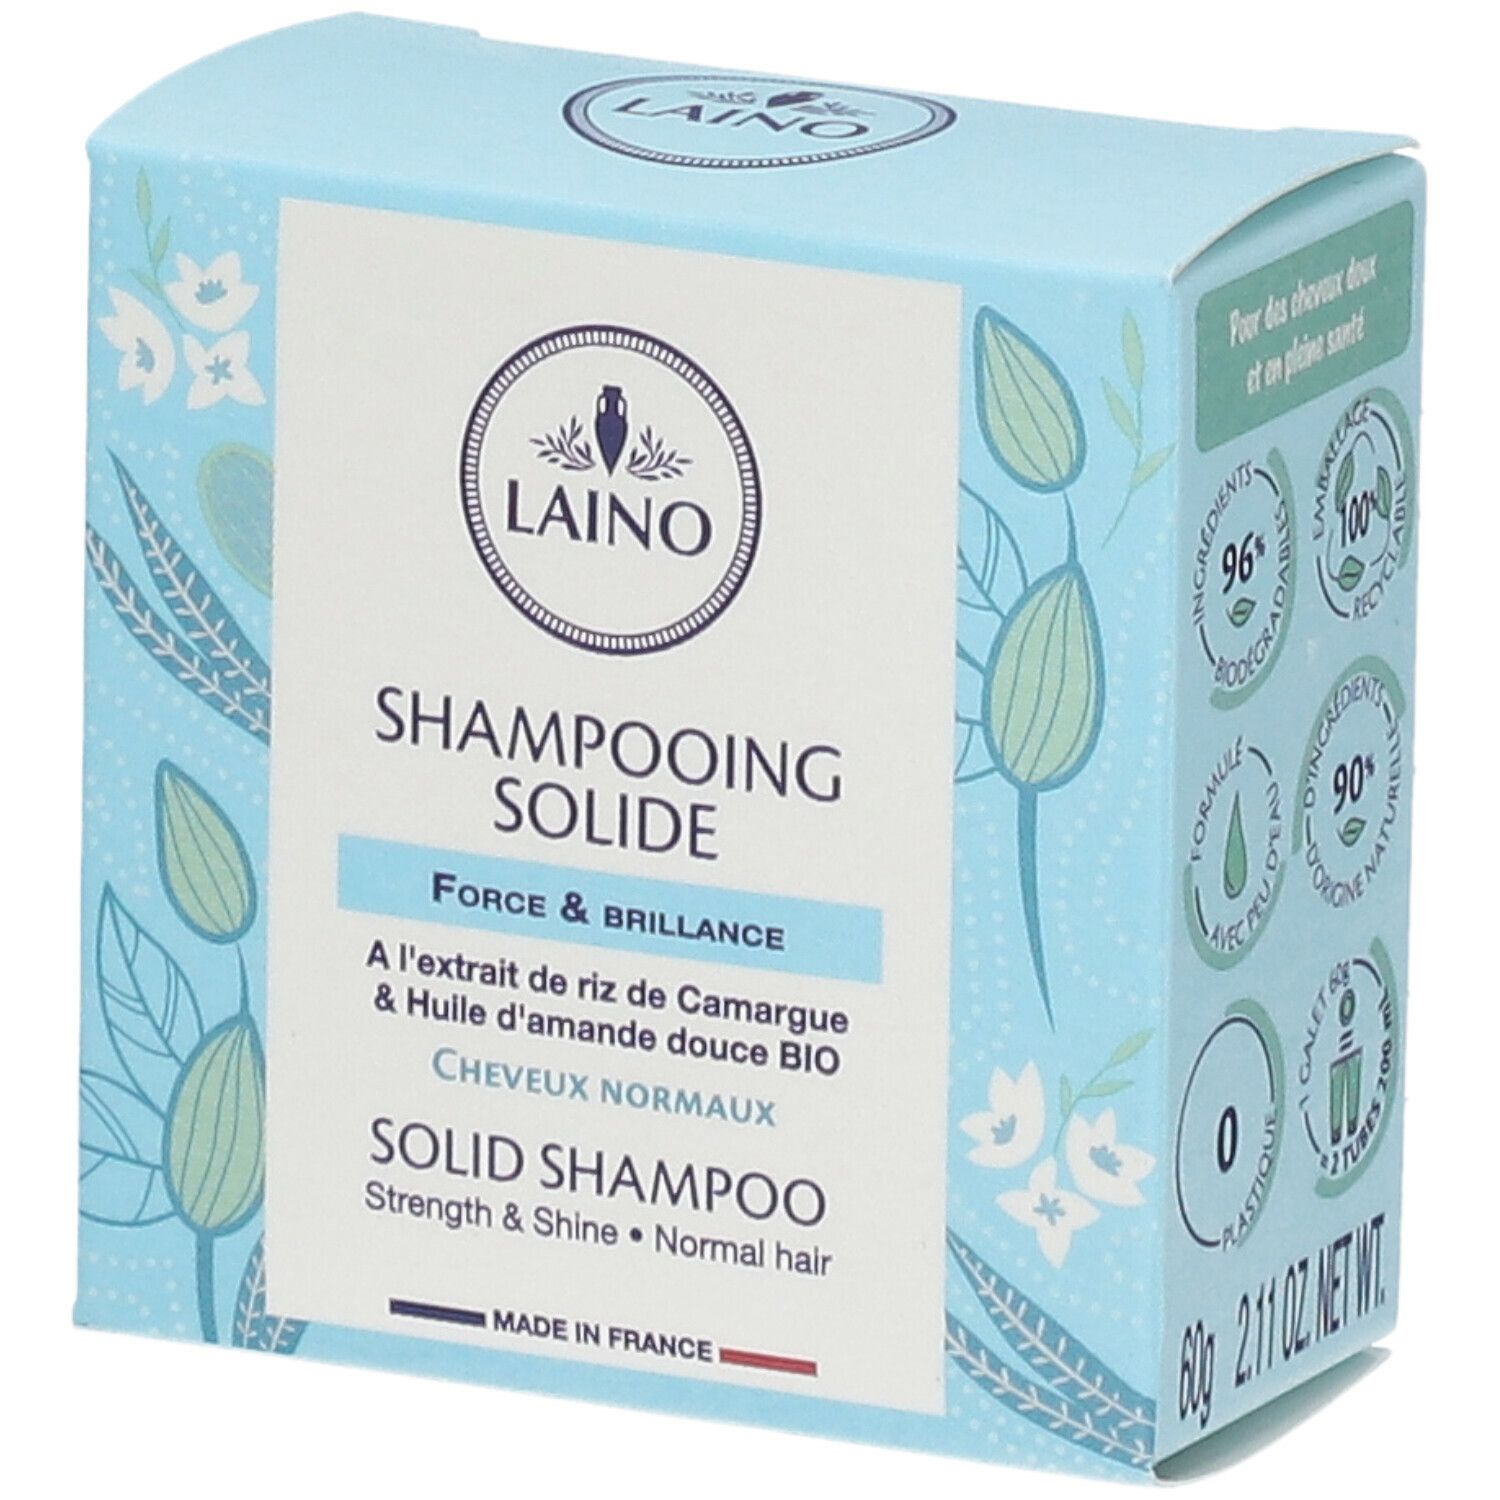 Laino Shampooing solide Force & Brillance